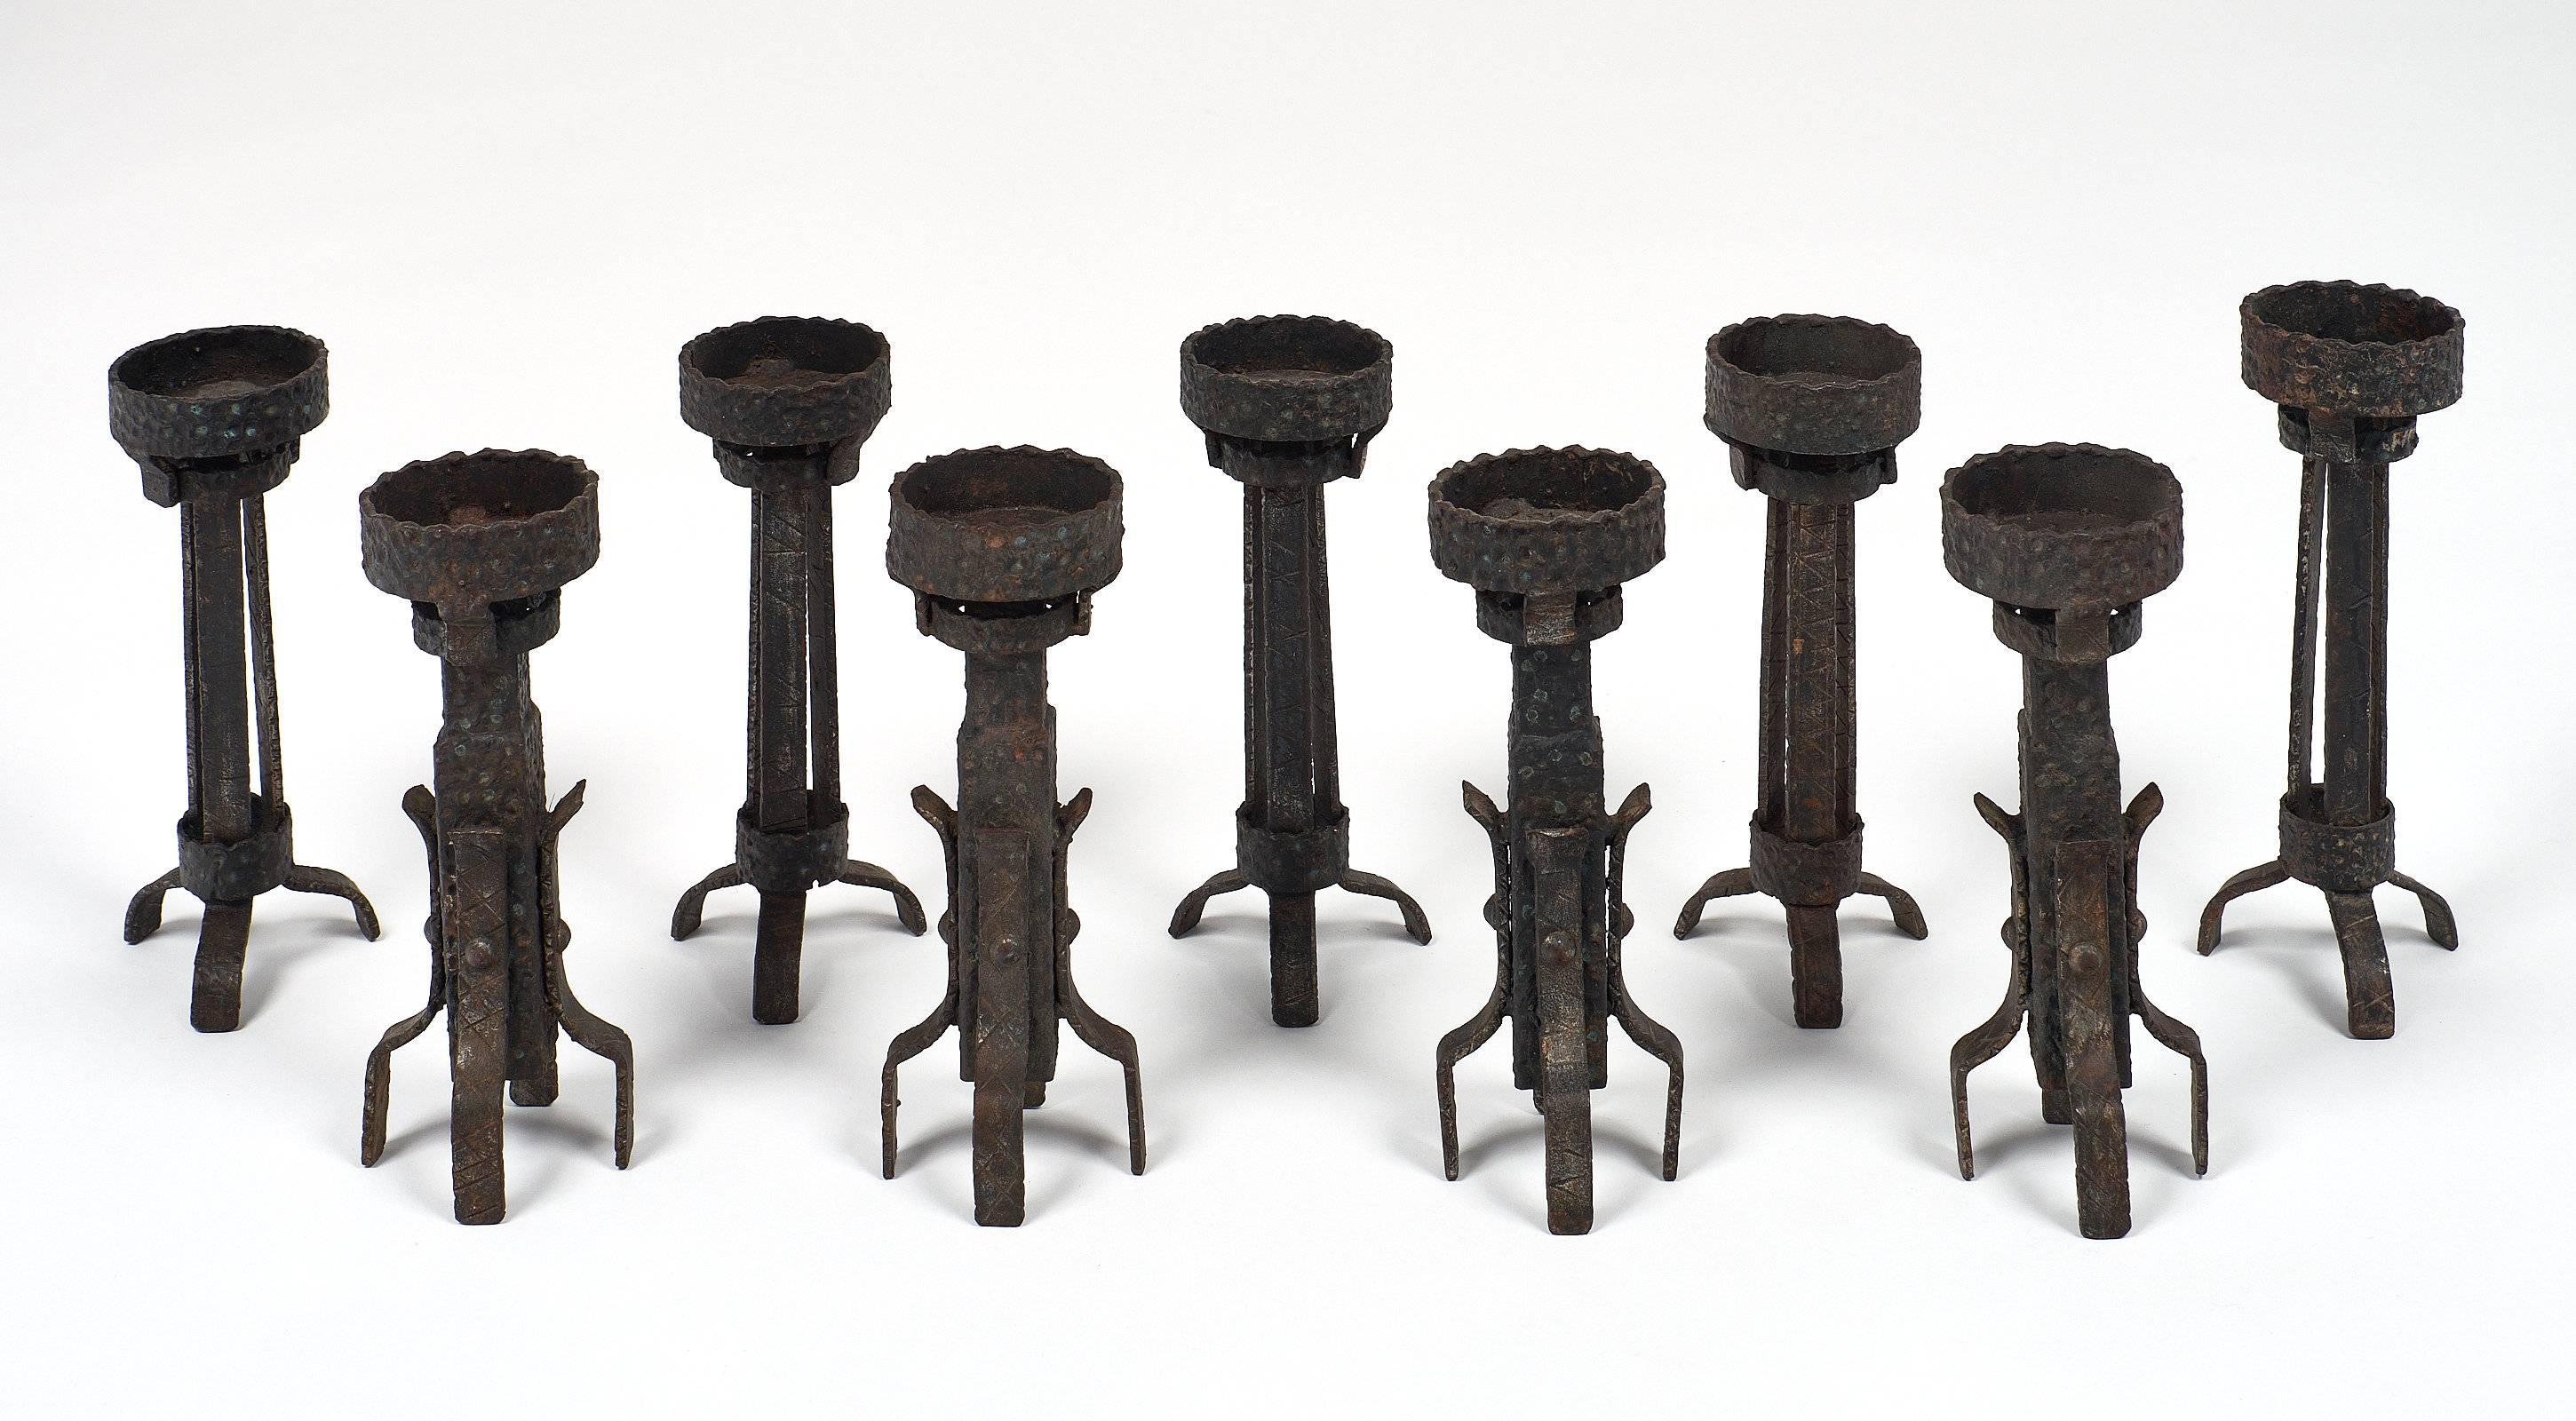 A rare set of forged and hand-hammered iron candlesticks from a private chapel in the region of Barcelona. Each of them uniquely crafted with specific details. We loved the originality of the collection! As they are handmade, each has unique